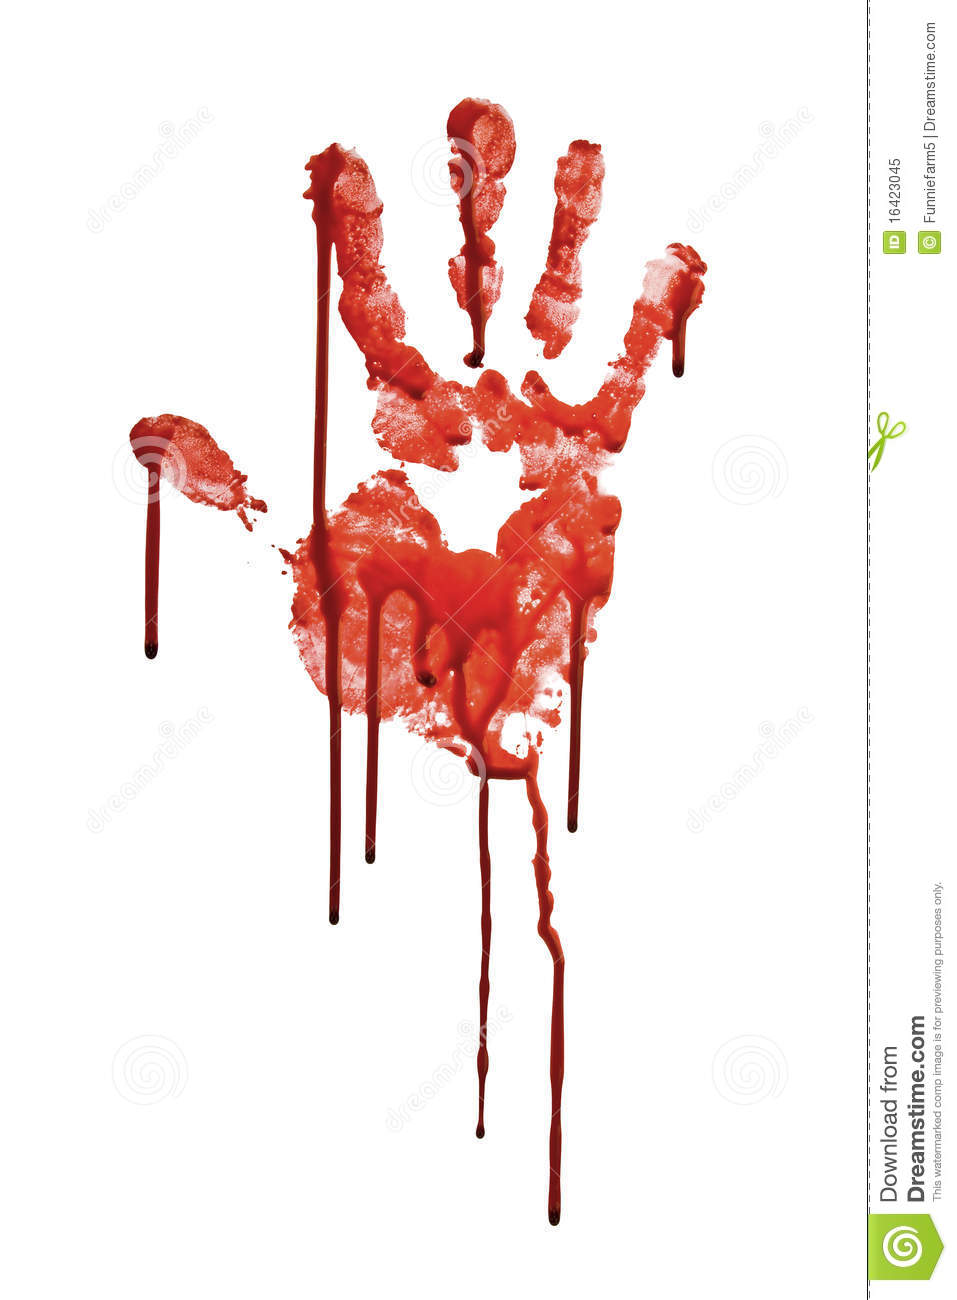 Bloody Hand Prints Isolated On White Background